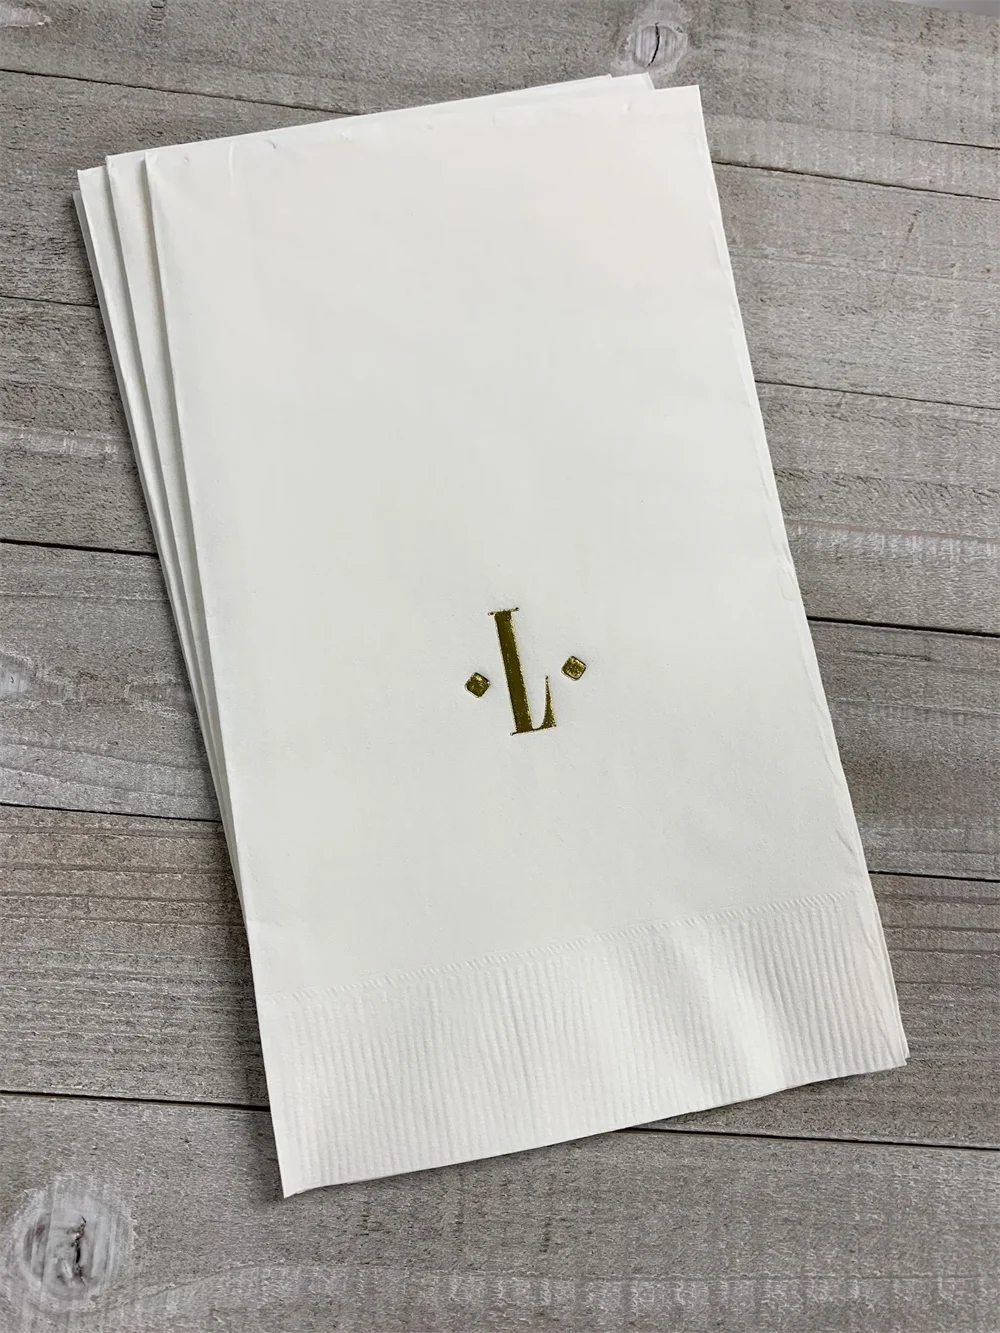 

Personalized Hand Guest Towels Paper Dinner Napkins Wedding Favors Hostess Gift Party Engagement Monogram Birthday Bar Bat Mitzv